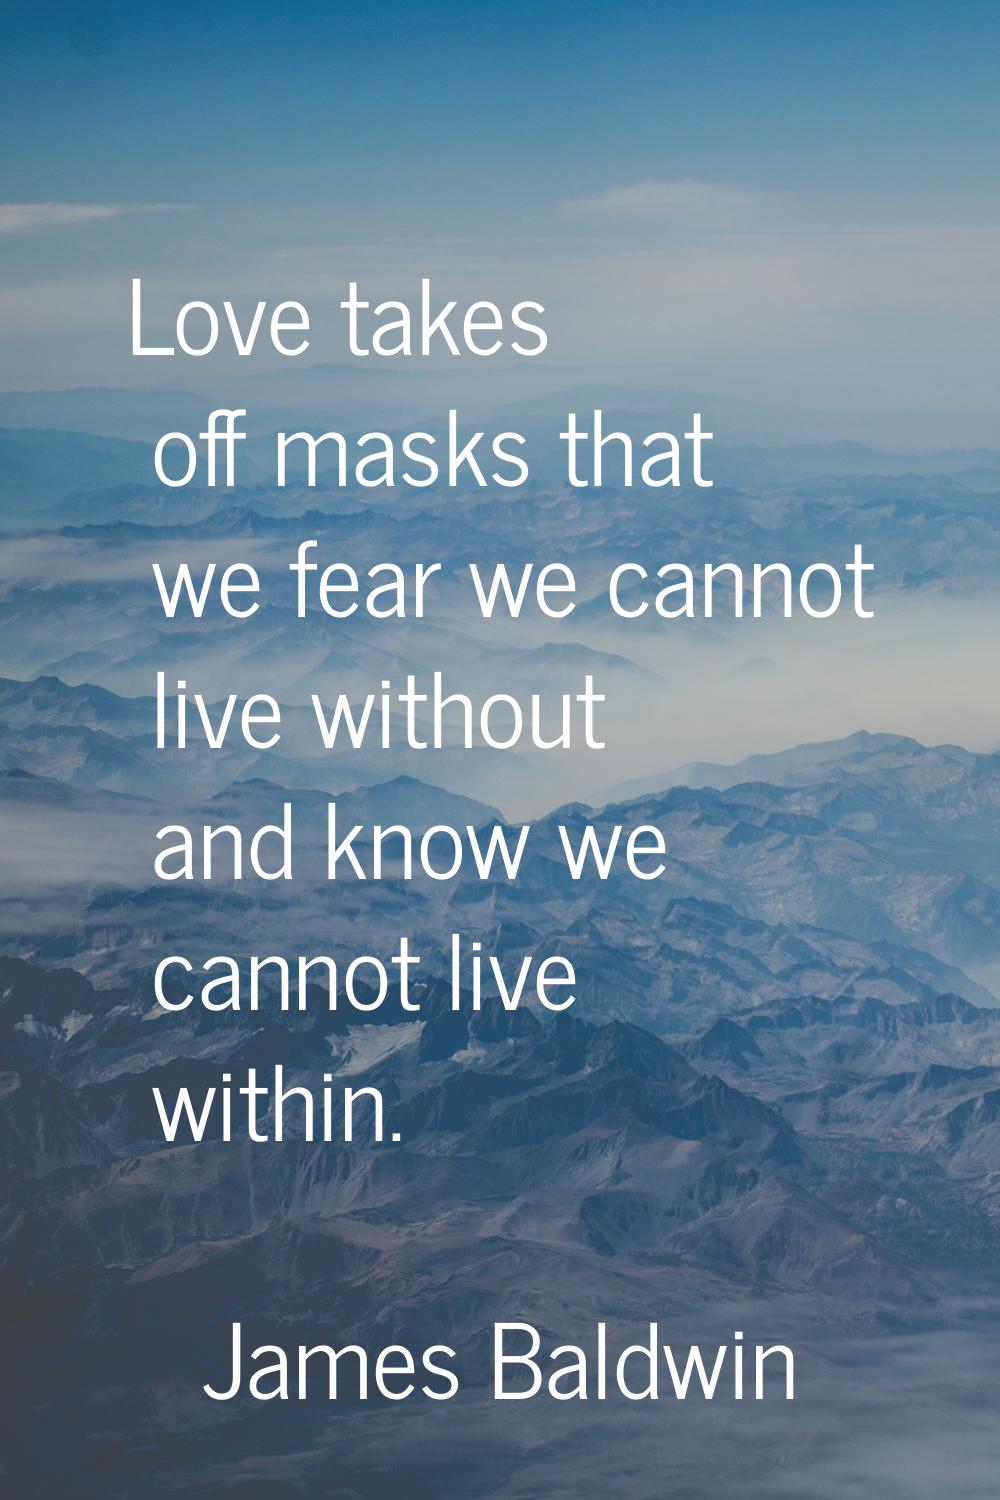 Love takes off masks that we fear we cannot live without and know we cannot live within.